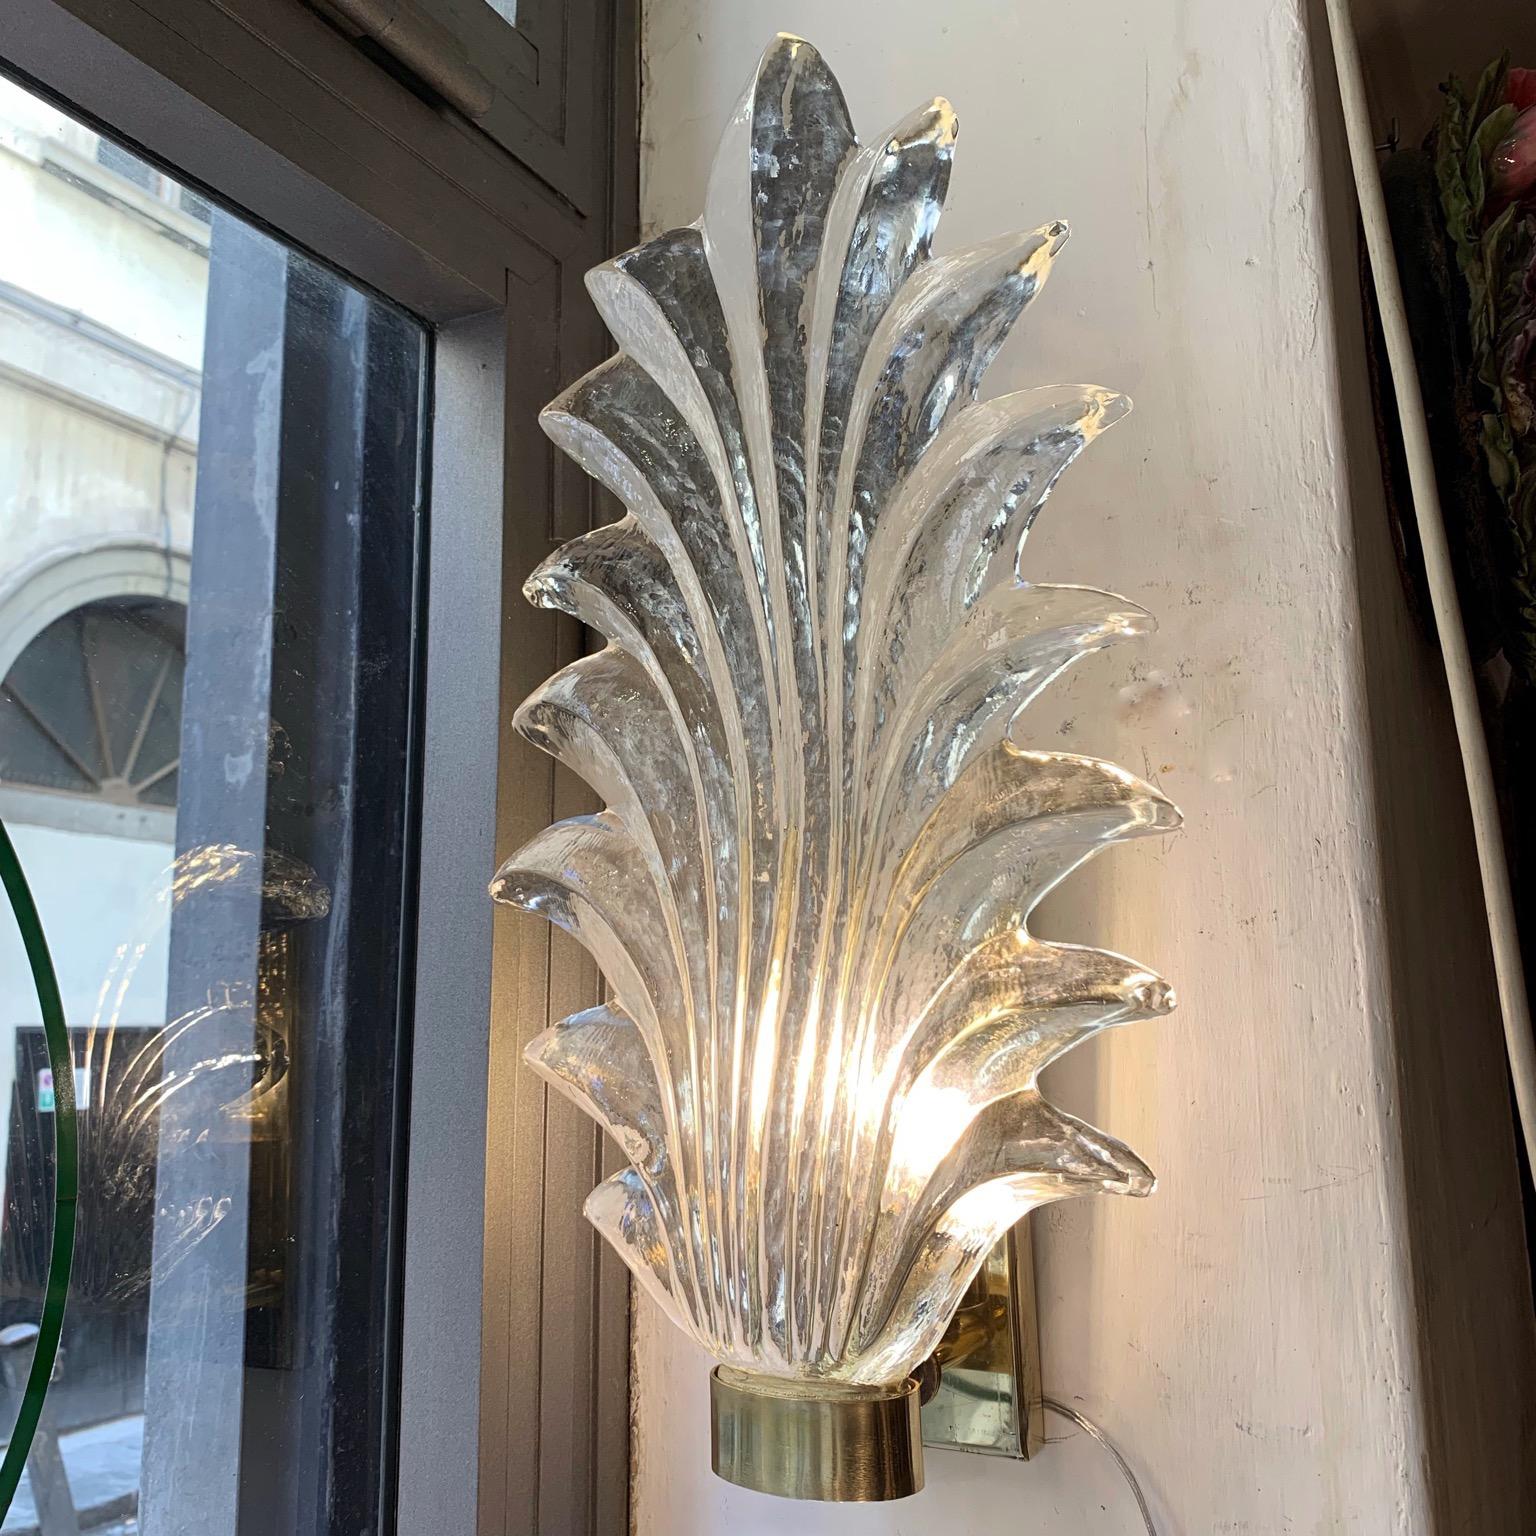 Pair of Murano clear glass leaf sconces, brass structure, one bulb per sconce.
The hand blown bright clear glass is thick and heavy.